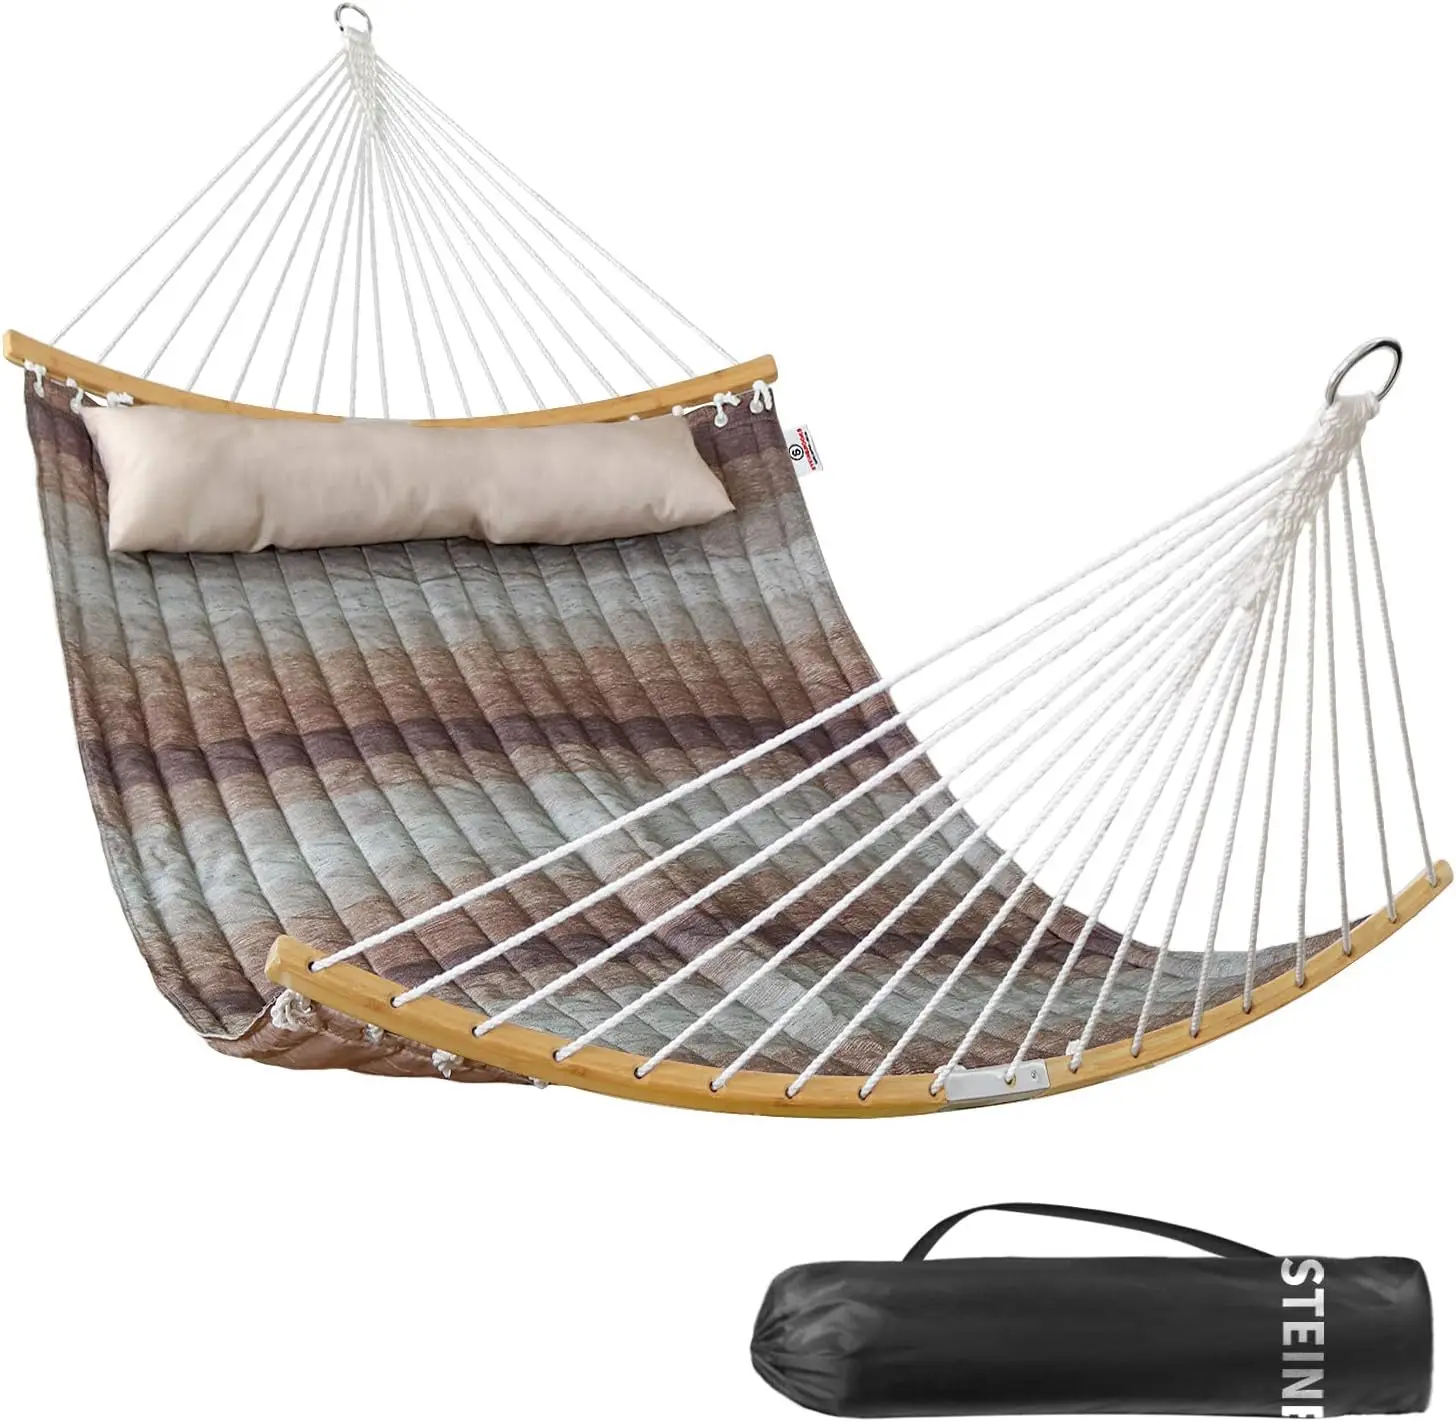 

Double Hammock, 11 FT Quilted Fabric 2 Person Hammock for Outside with Pillow, Folding Curved Spreader Bar, Chains